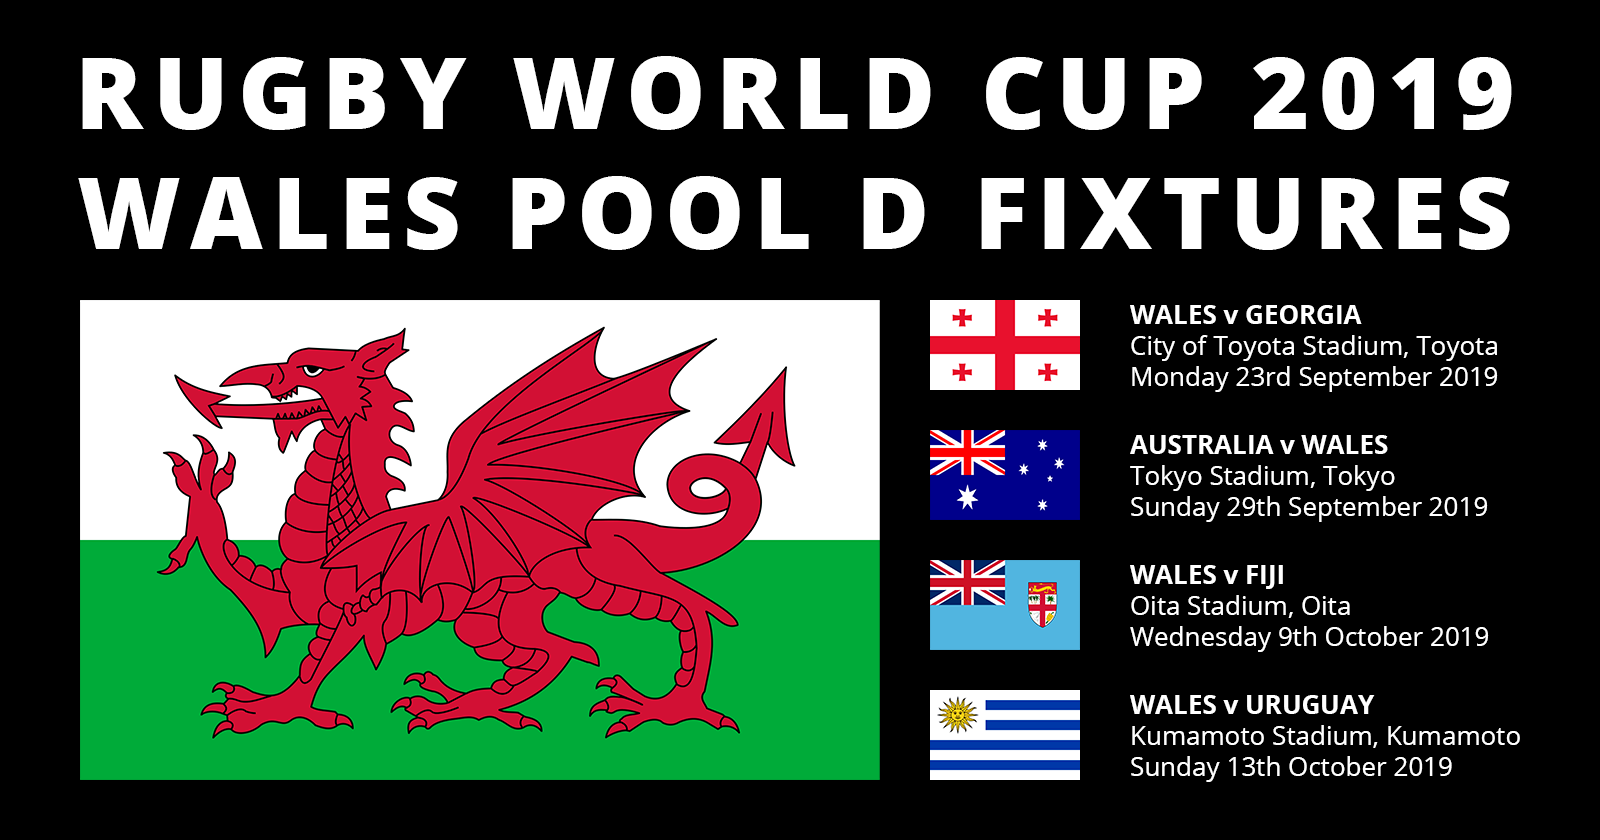 wales-rugby-world-cup-2019-fixtures